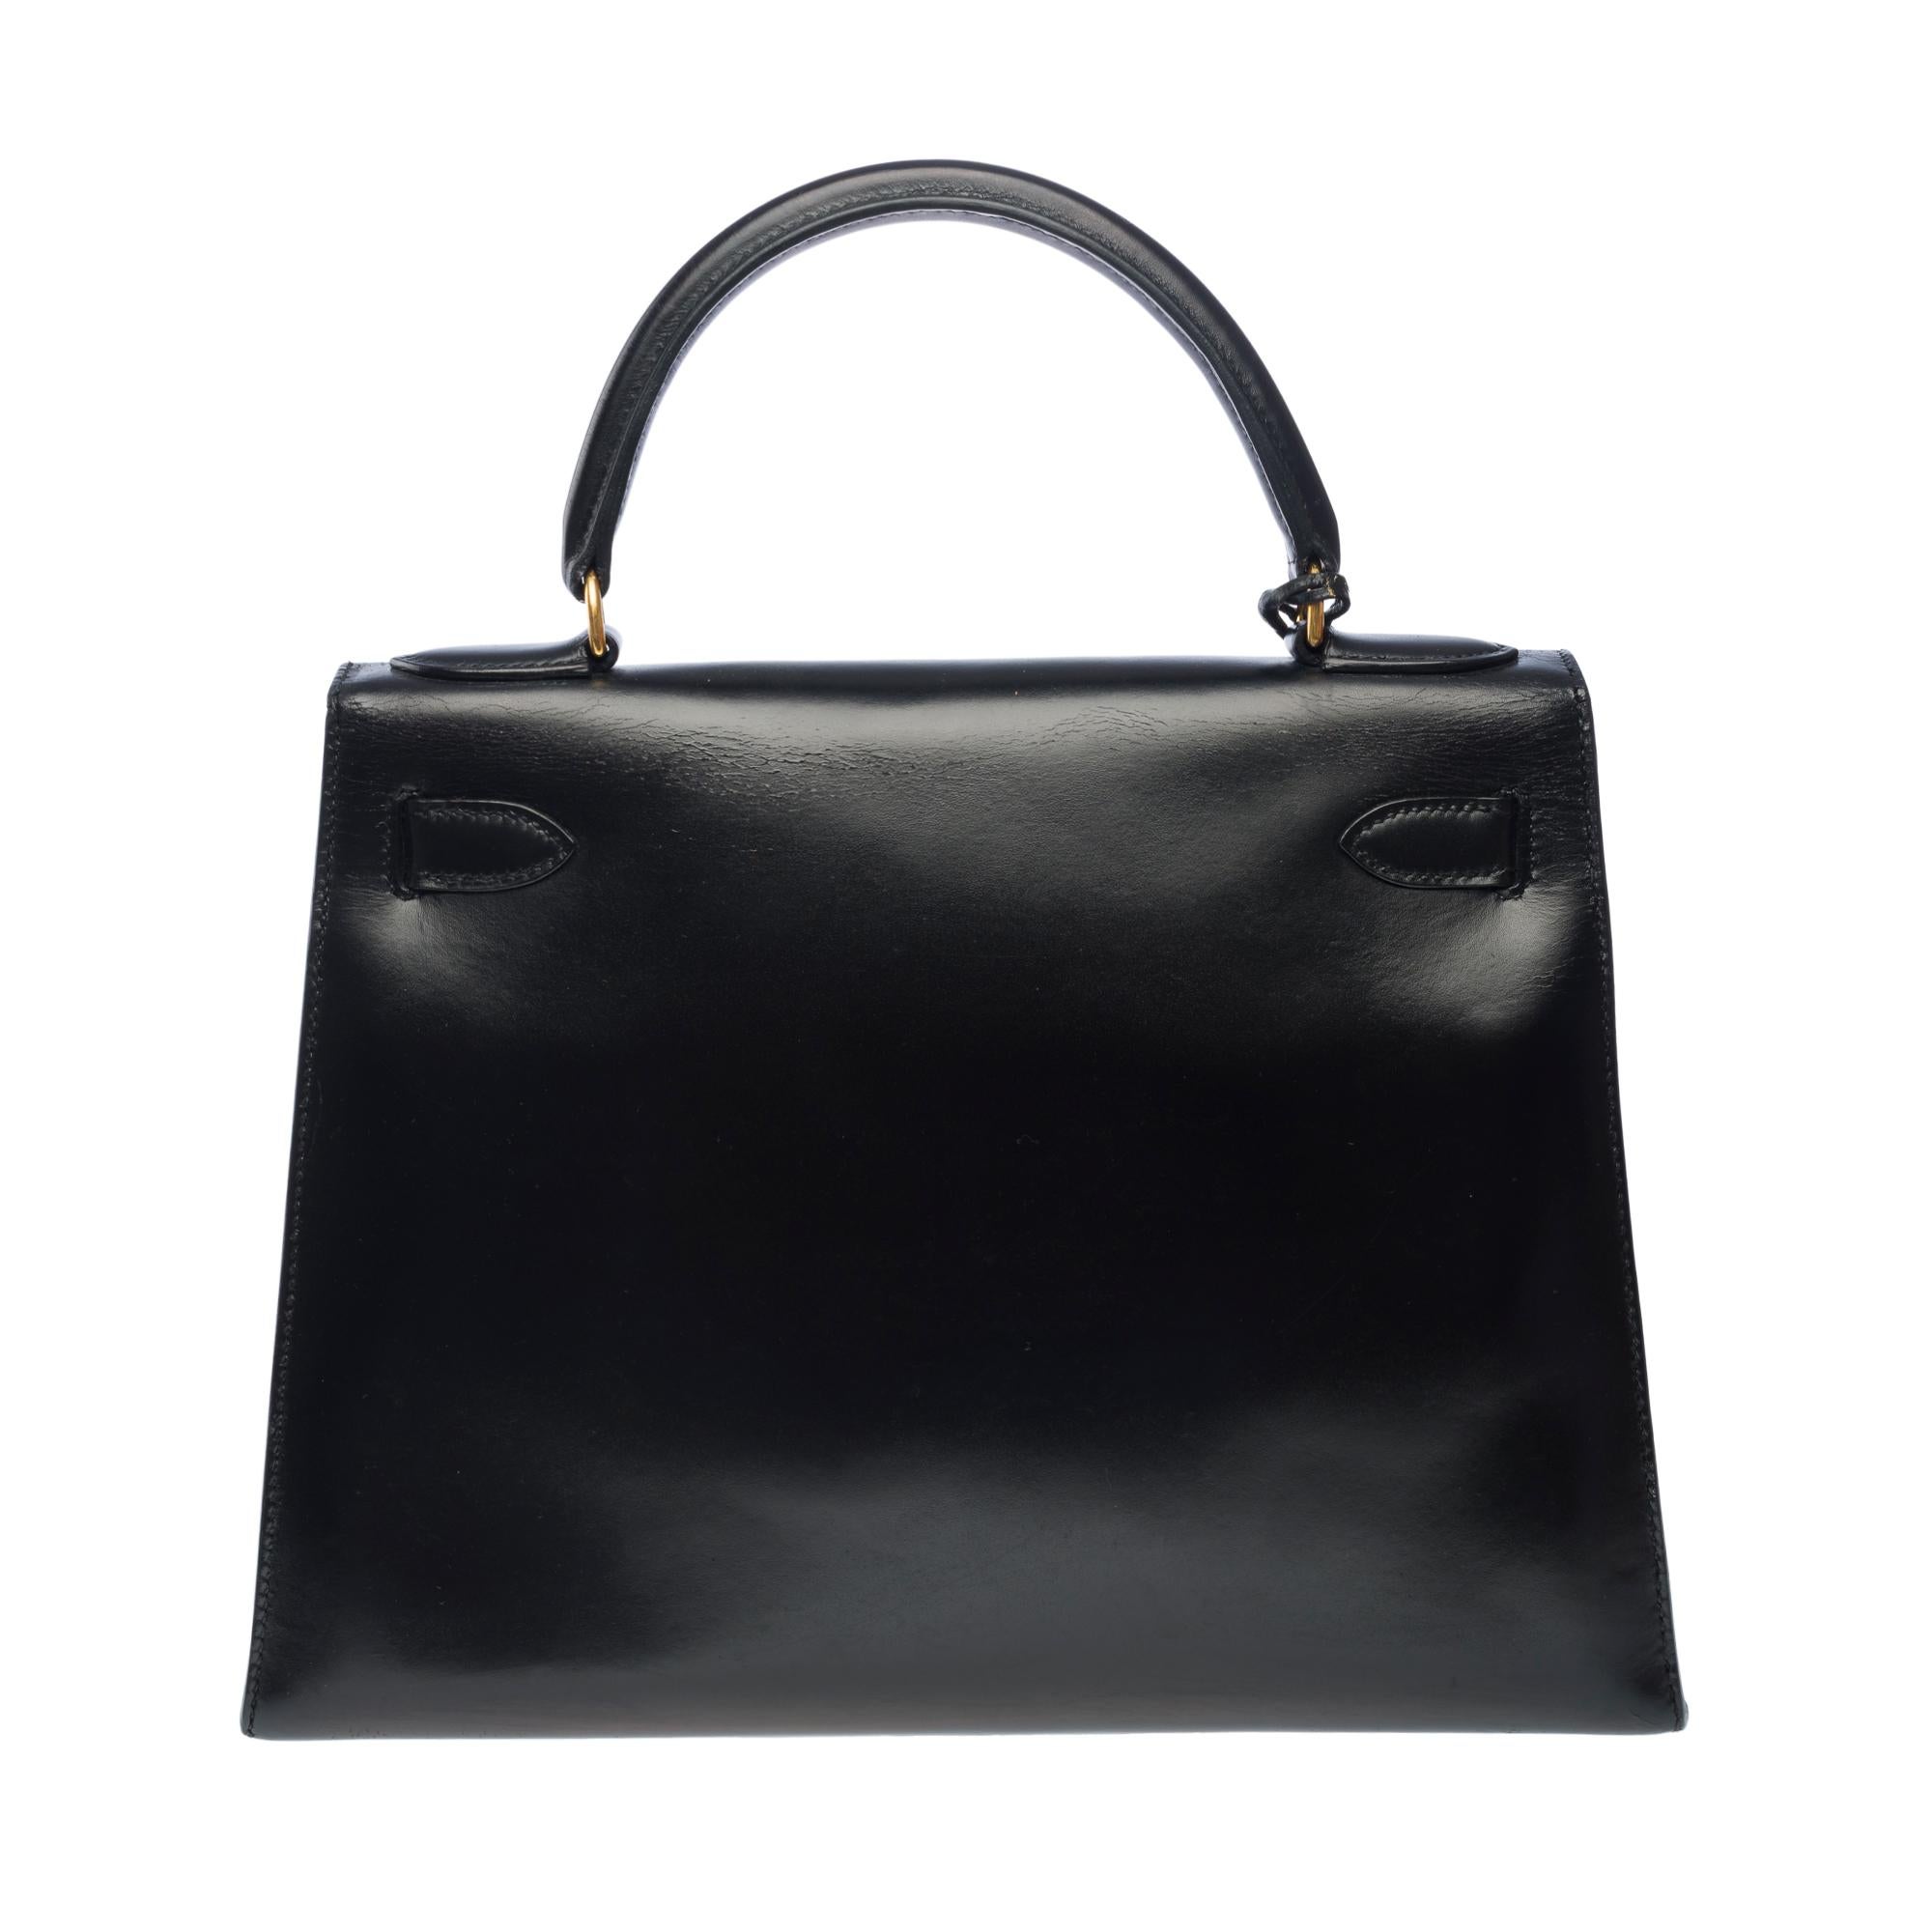 Hermes Kelly 28 sellier handbag in Black box calfskin leather, GHW In Good Condition For Sale In Paris, IDF